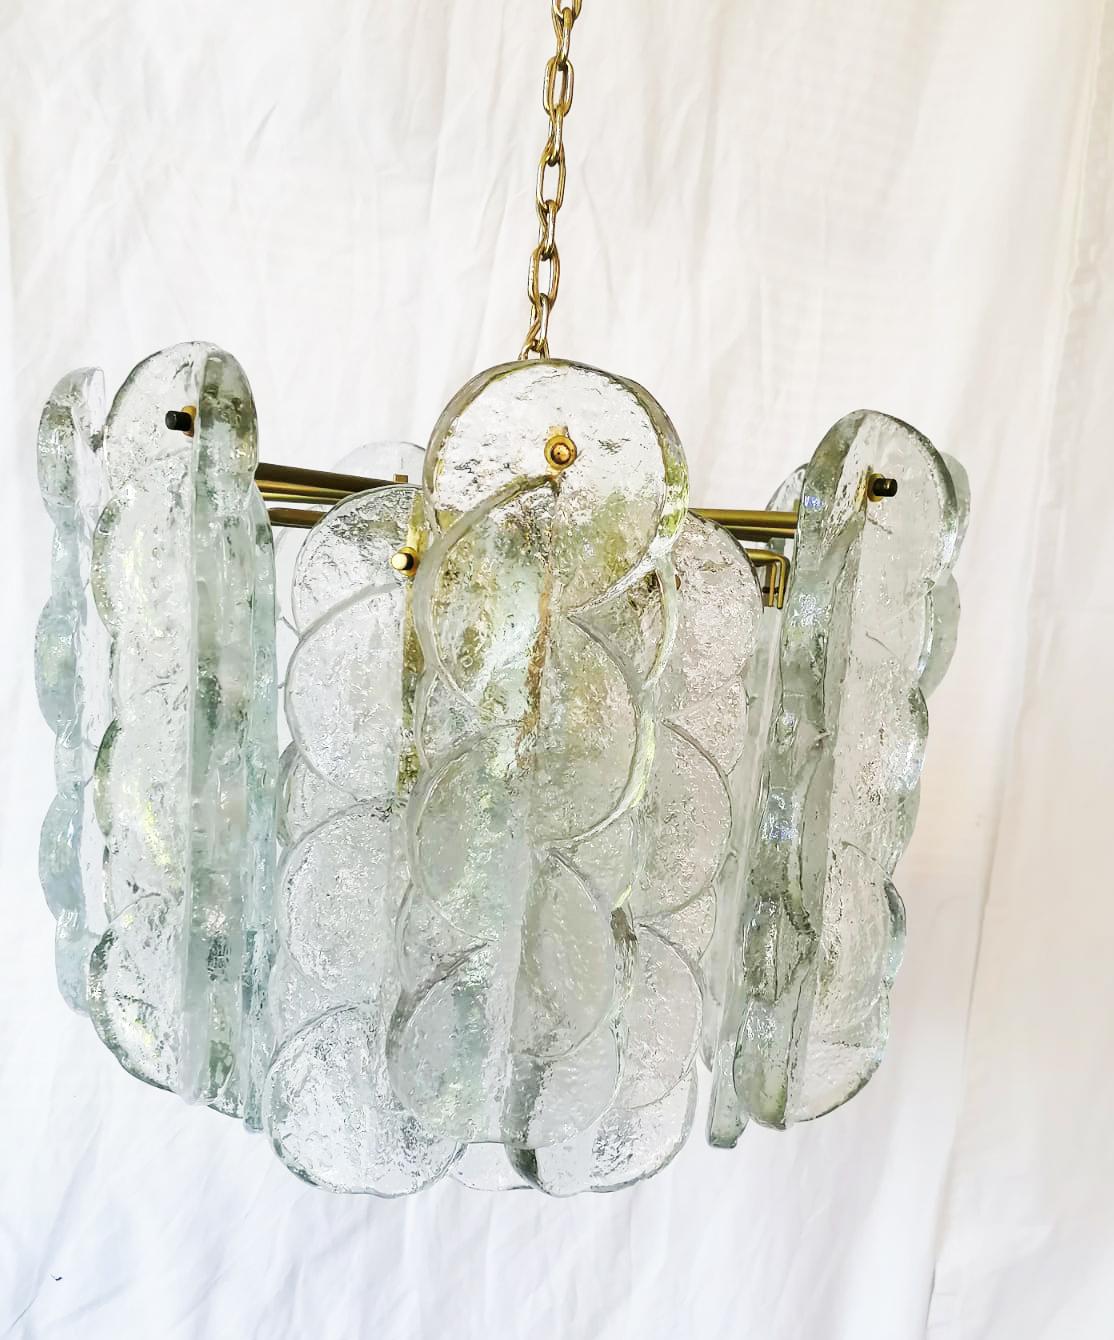 Citrus chandelier designed by J.T. Kalmar and manufactured by Kalmar in Austria. Brass frame withe 23 thick clear textured glass panels, Fitted with 6 E27 sockets. H 46 cm without chain, chain 136 cm, total 190 cm, diameter 50 cm. Excellent original